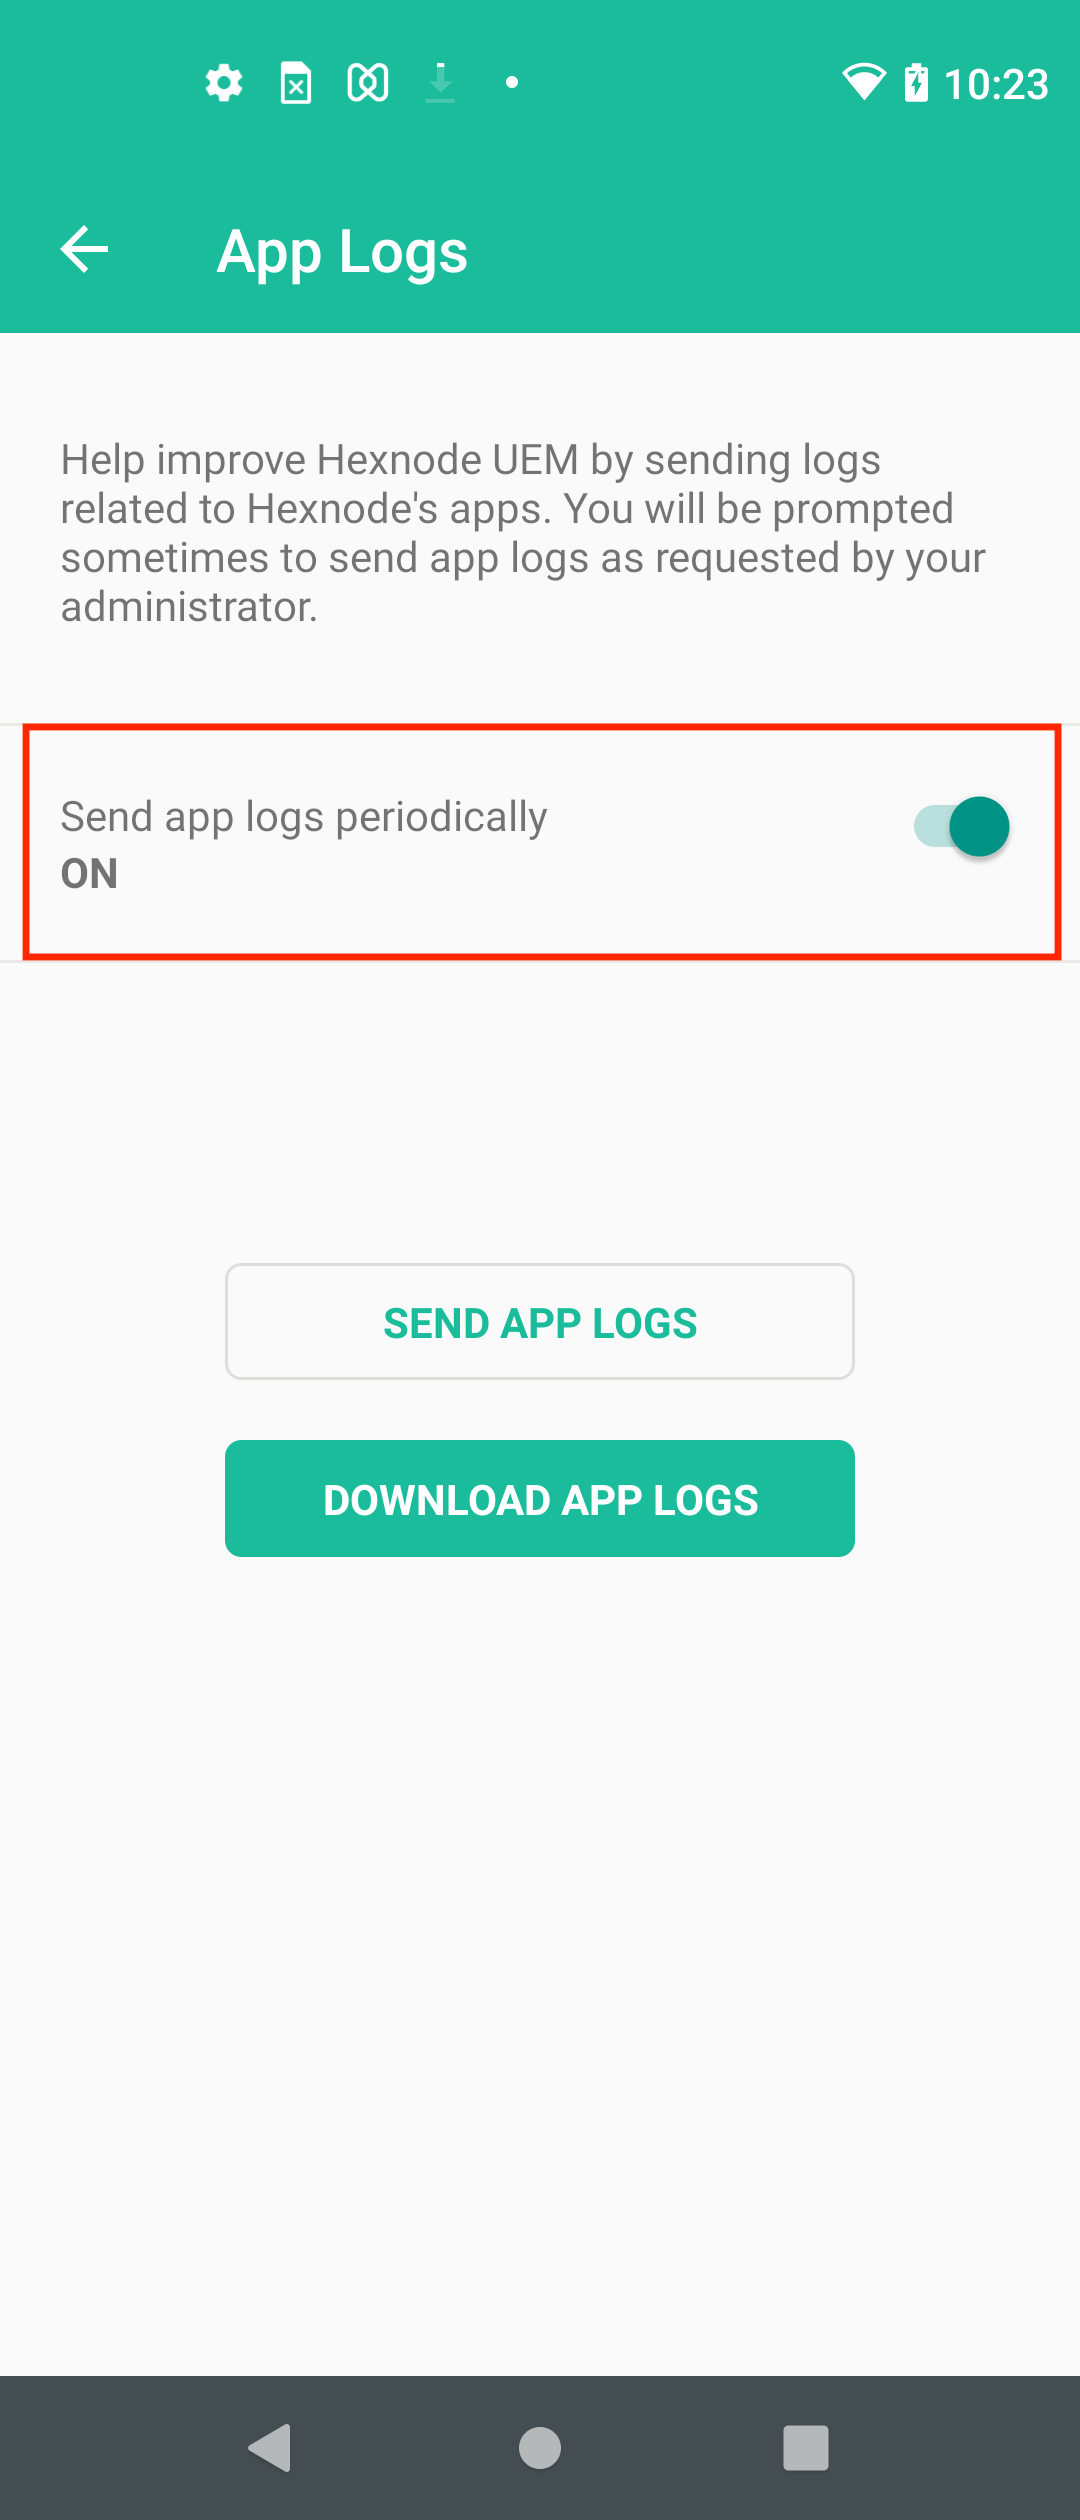 Enable the option send app logs periodically on the Hexnode UEM app